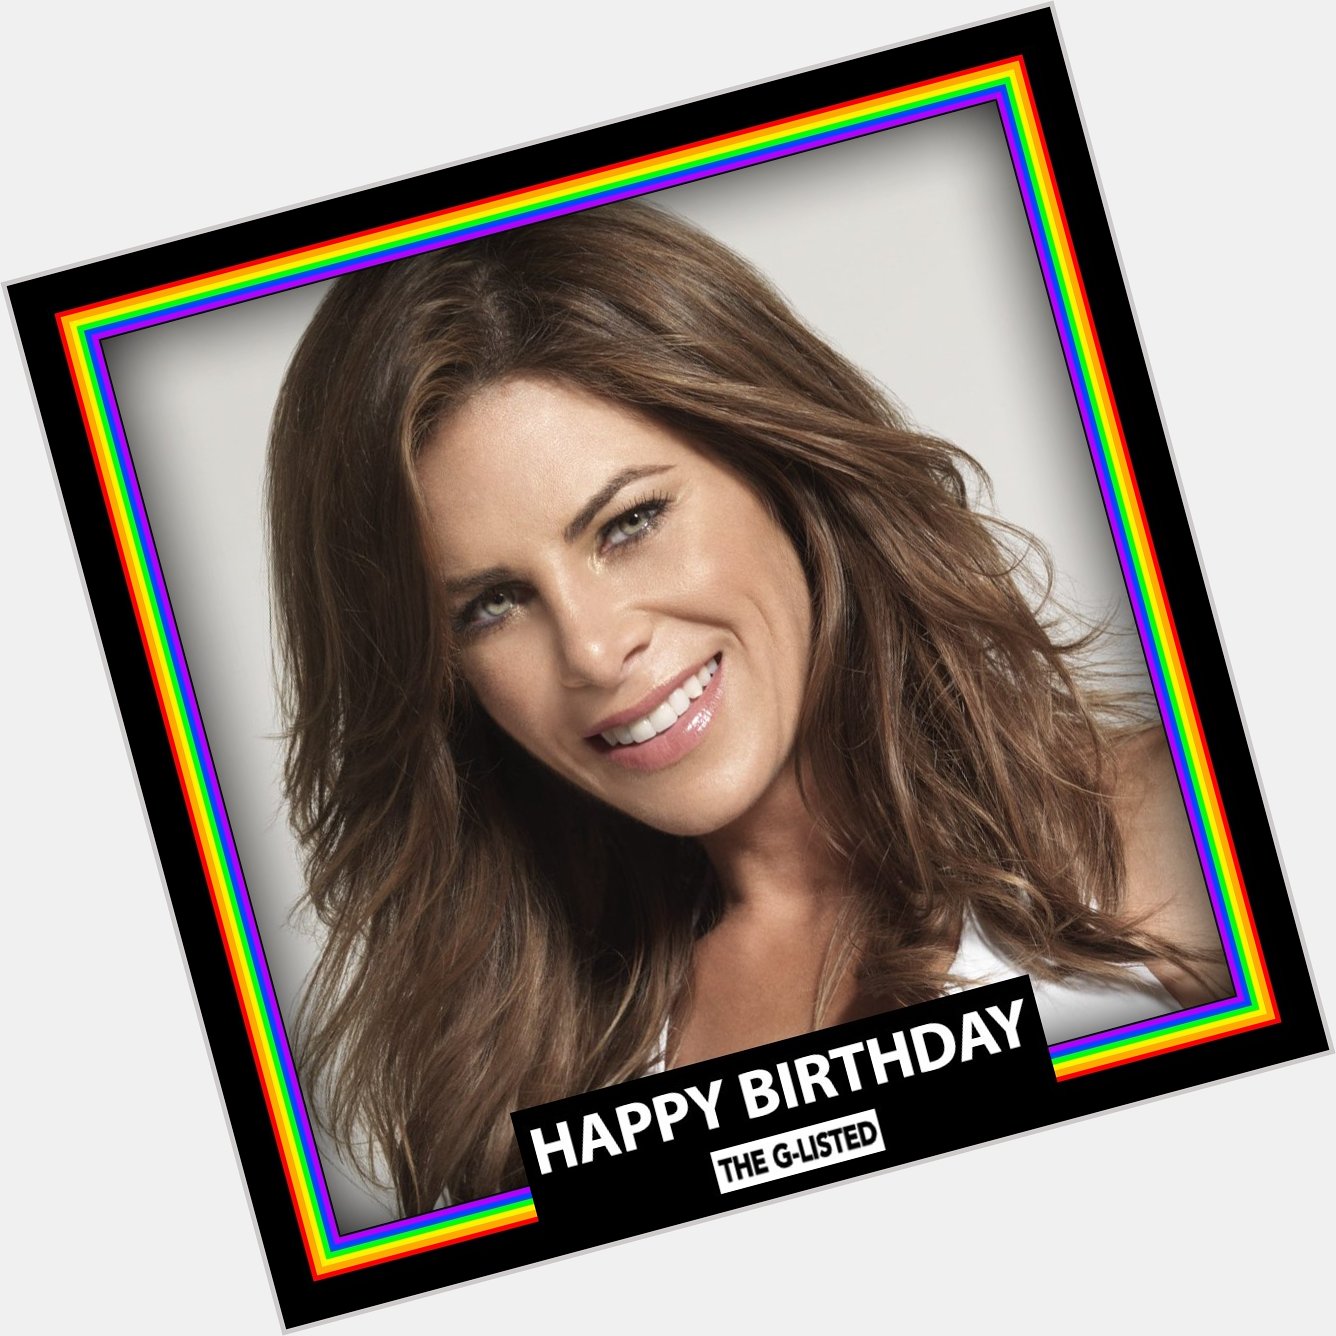 Happy birthday to fitness businesswoman, author, and TV personality Jillian Michaels! 